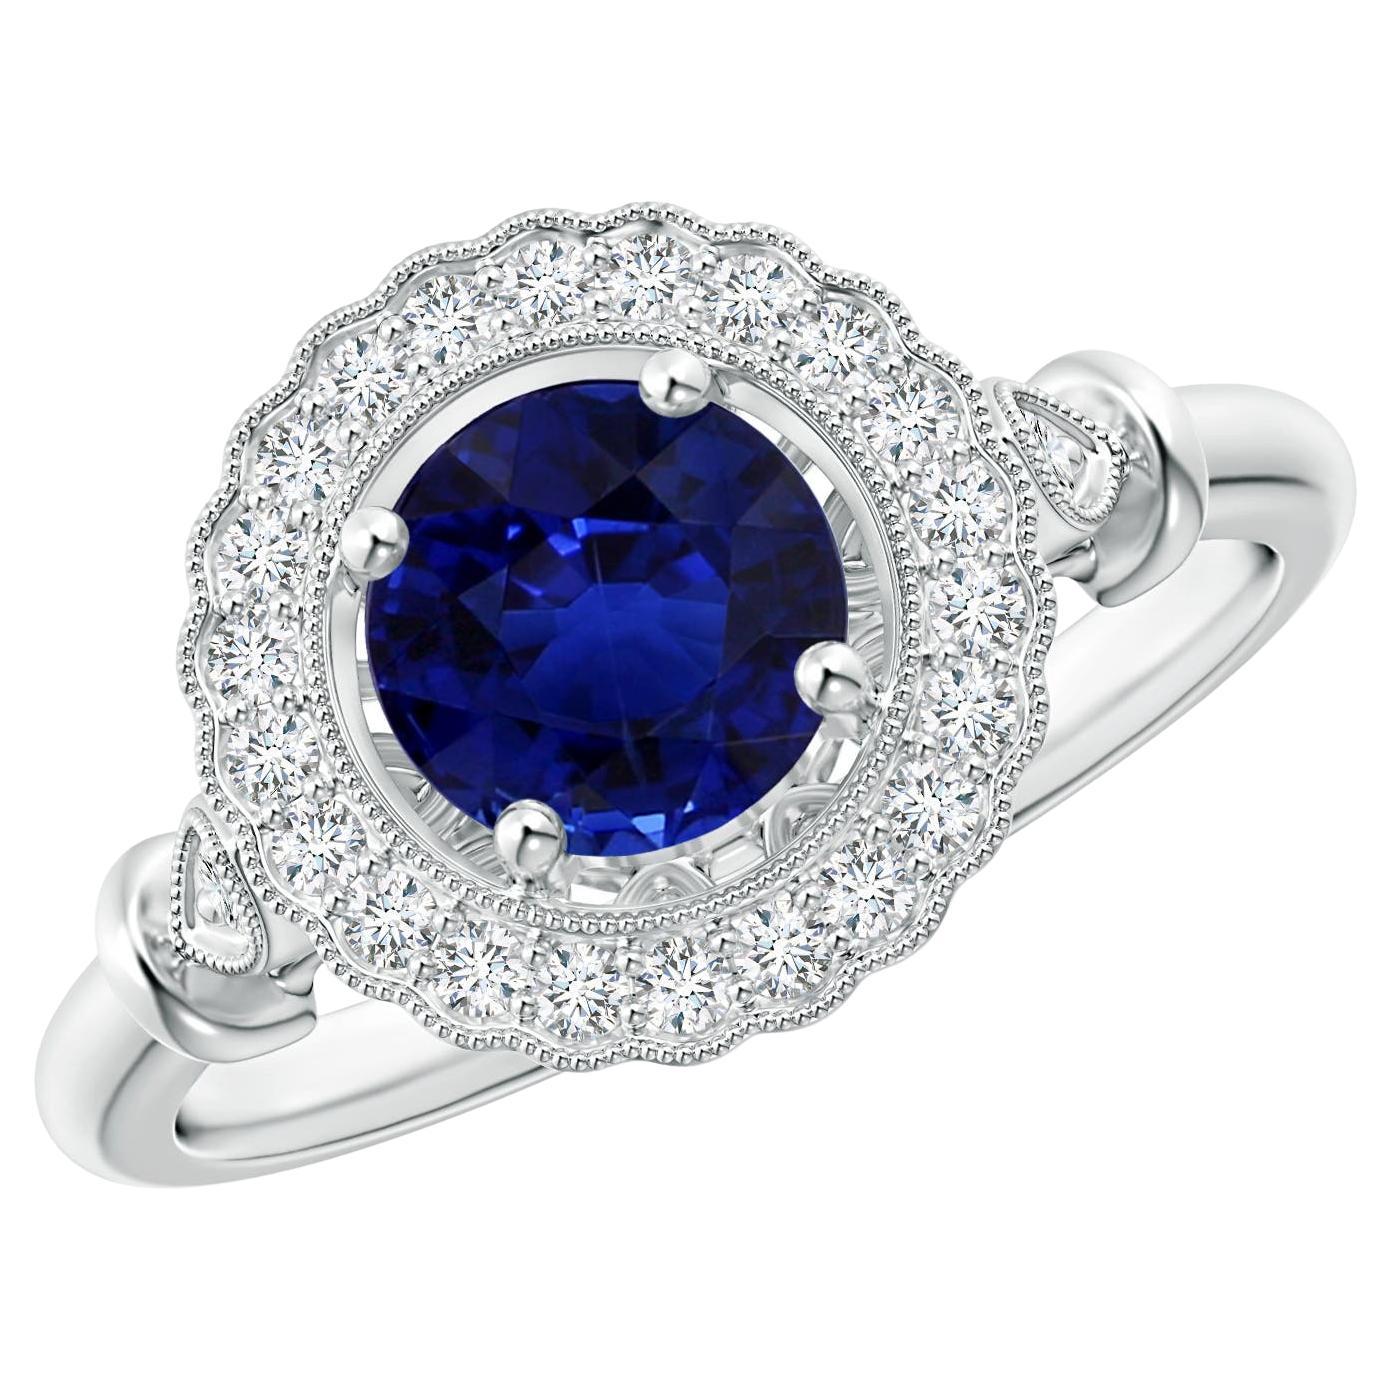 For Sale:  Angara GIA Certified Natural Sapphire Art Deco Inspired Halo Ring in White Gold